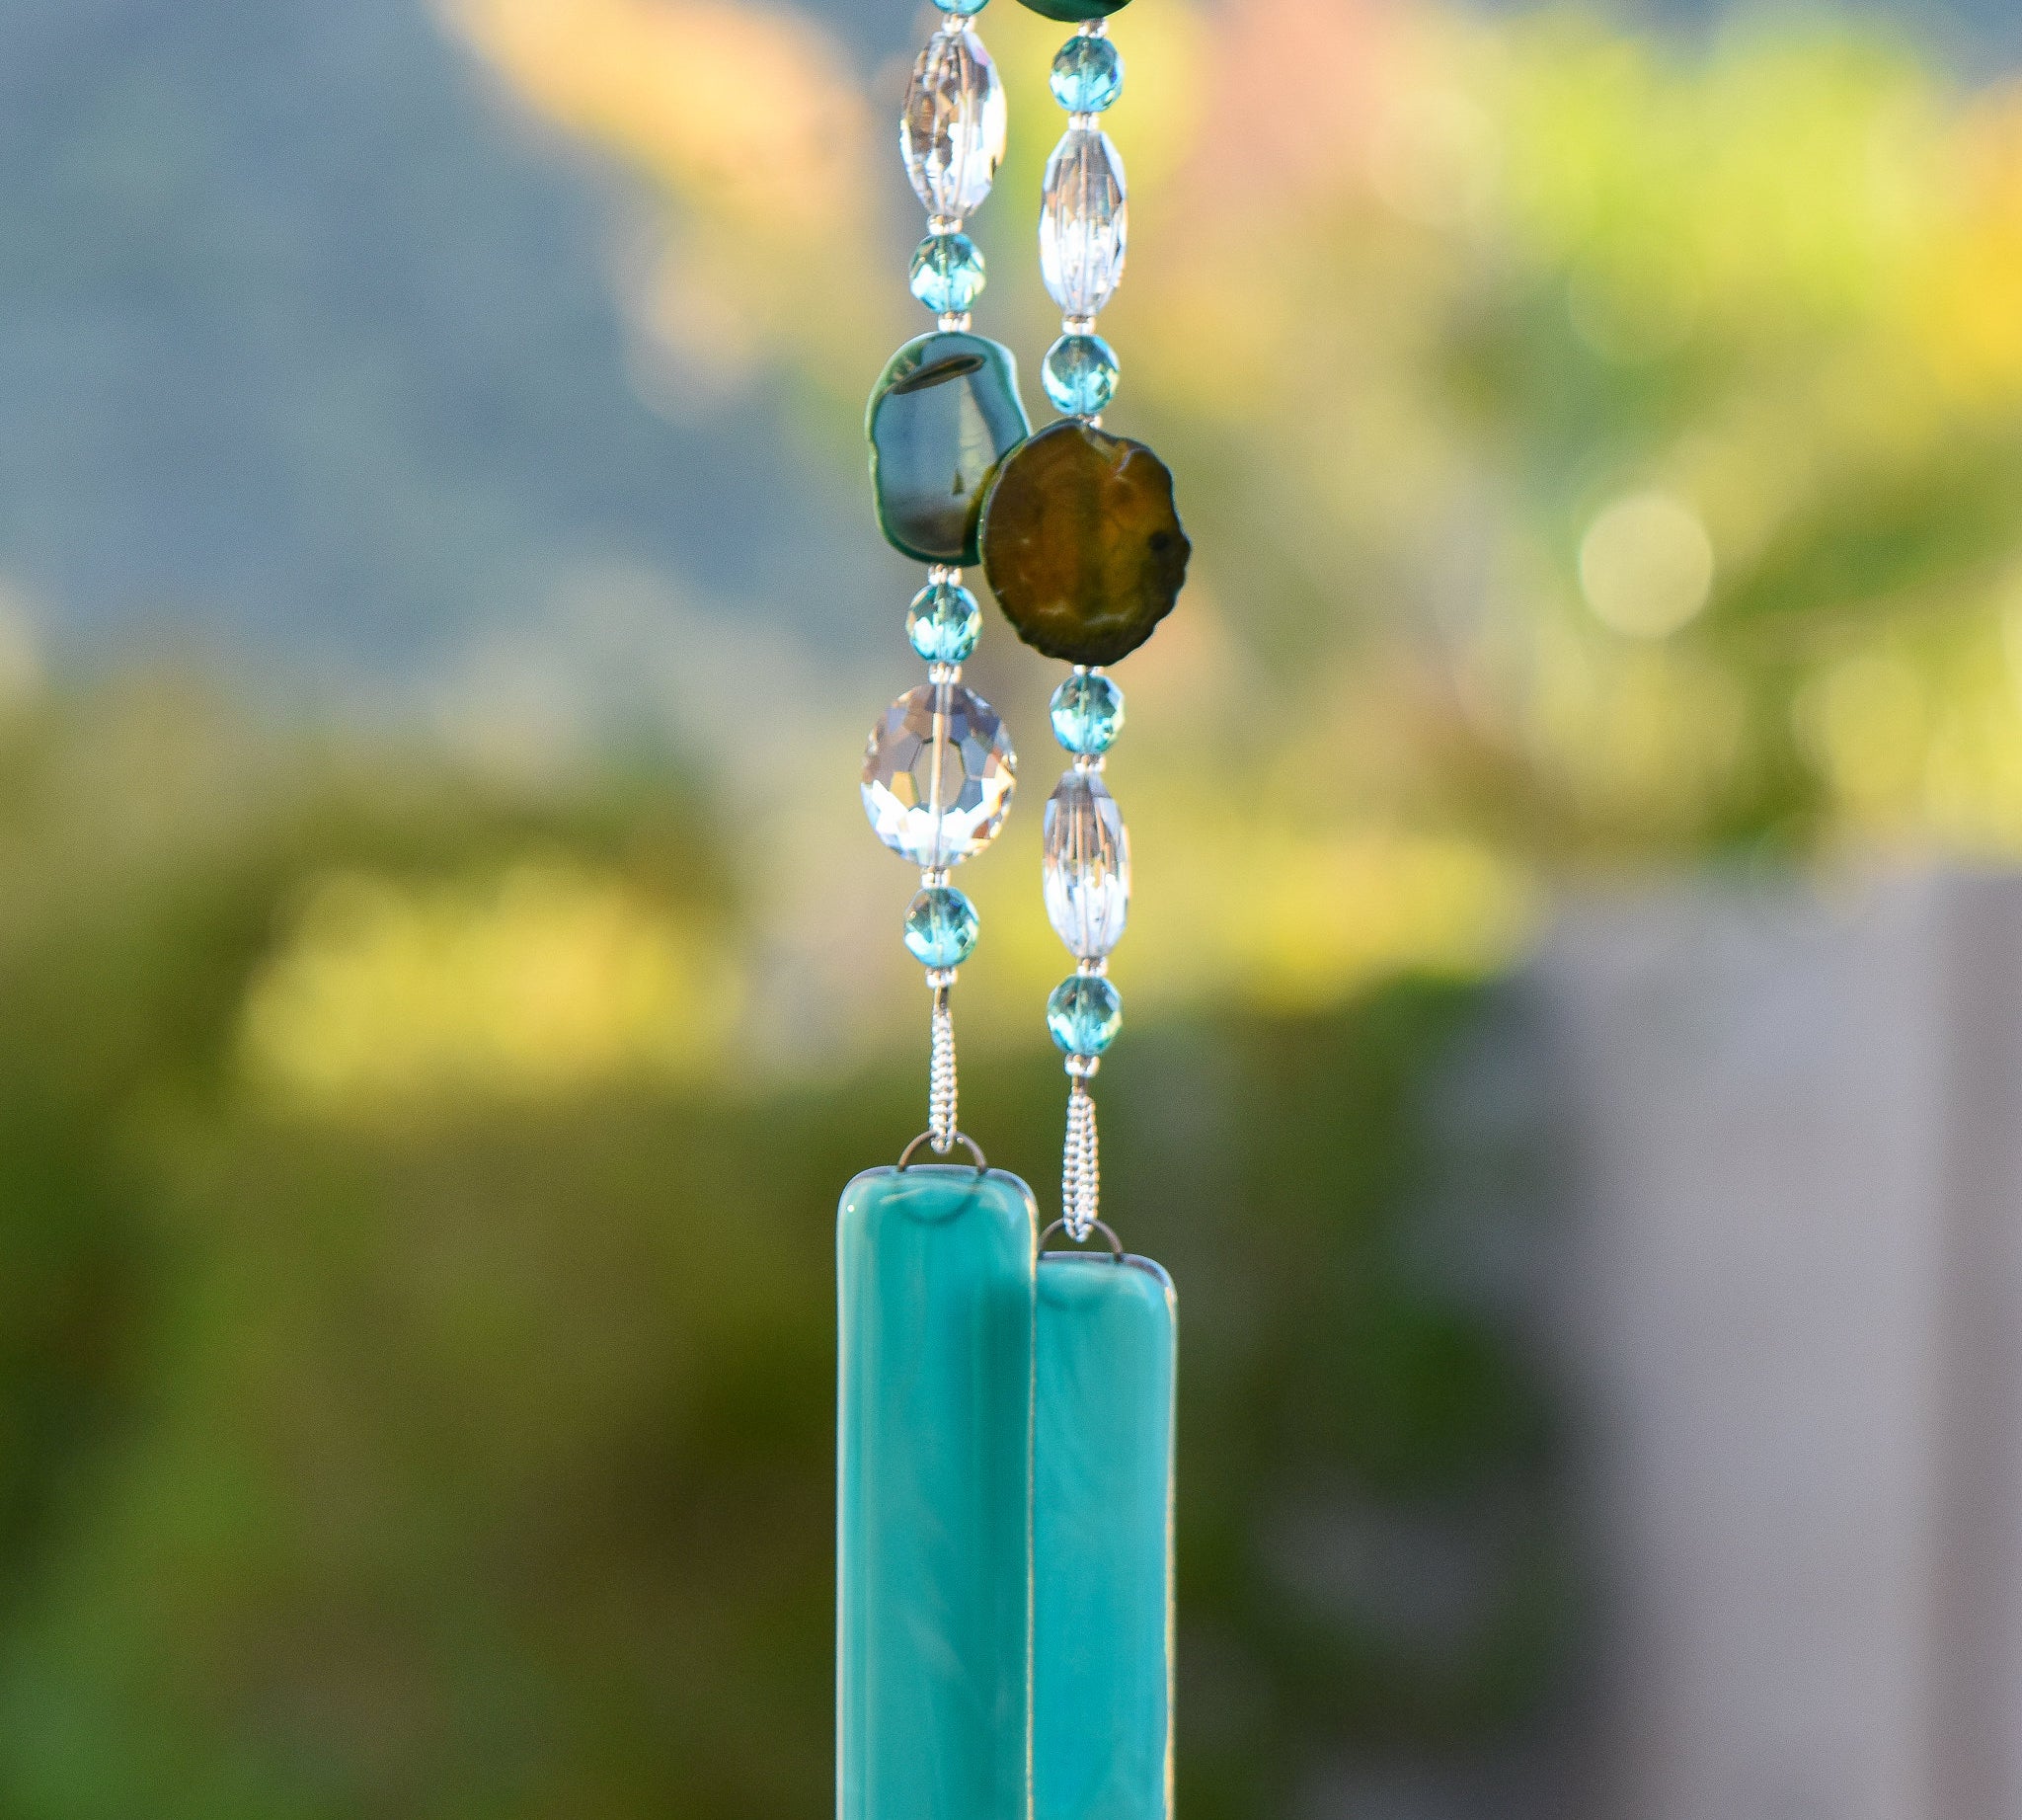 Green agate slice beads strung with glass crystal beads, hanging vertically from tree, anchored by two pieces of teal green fused glass